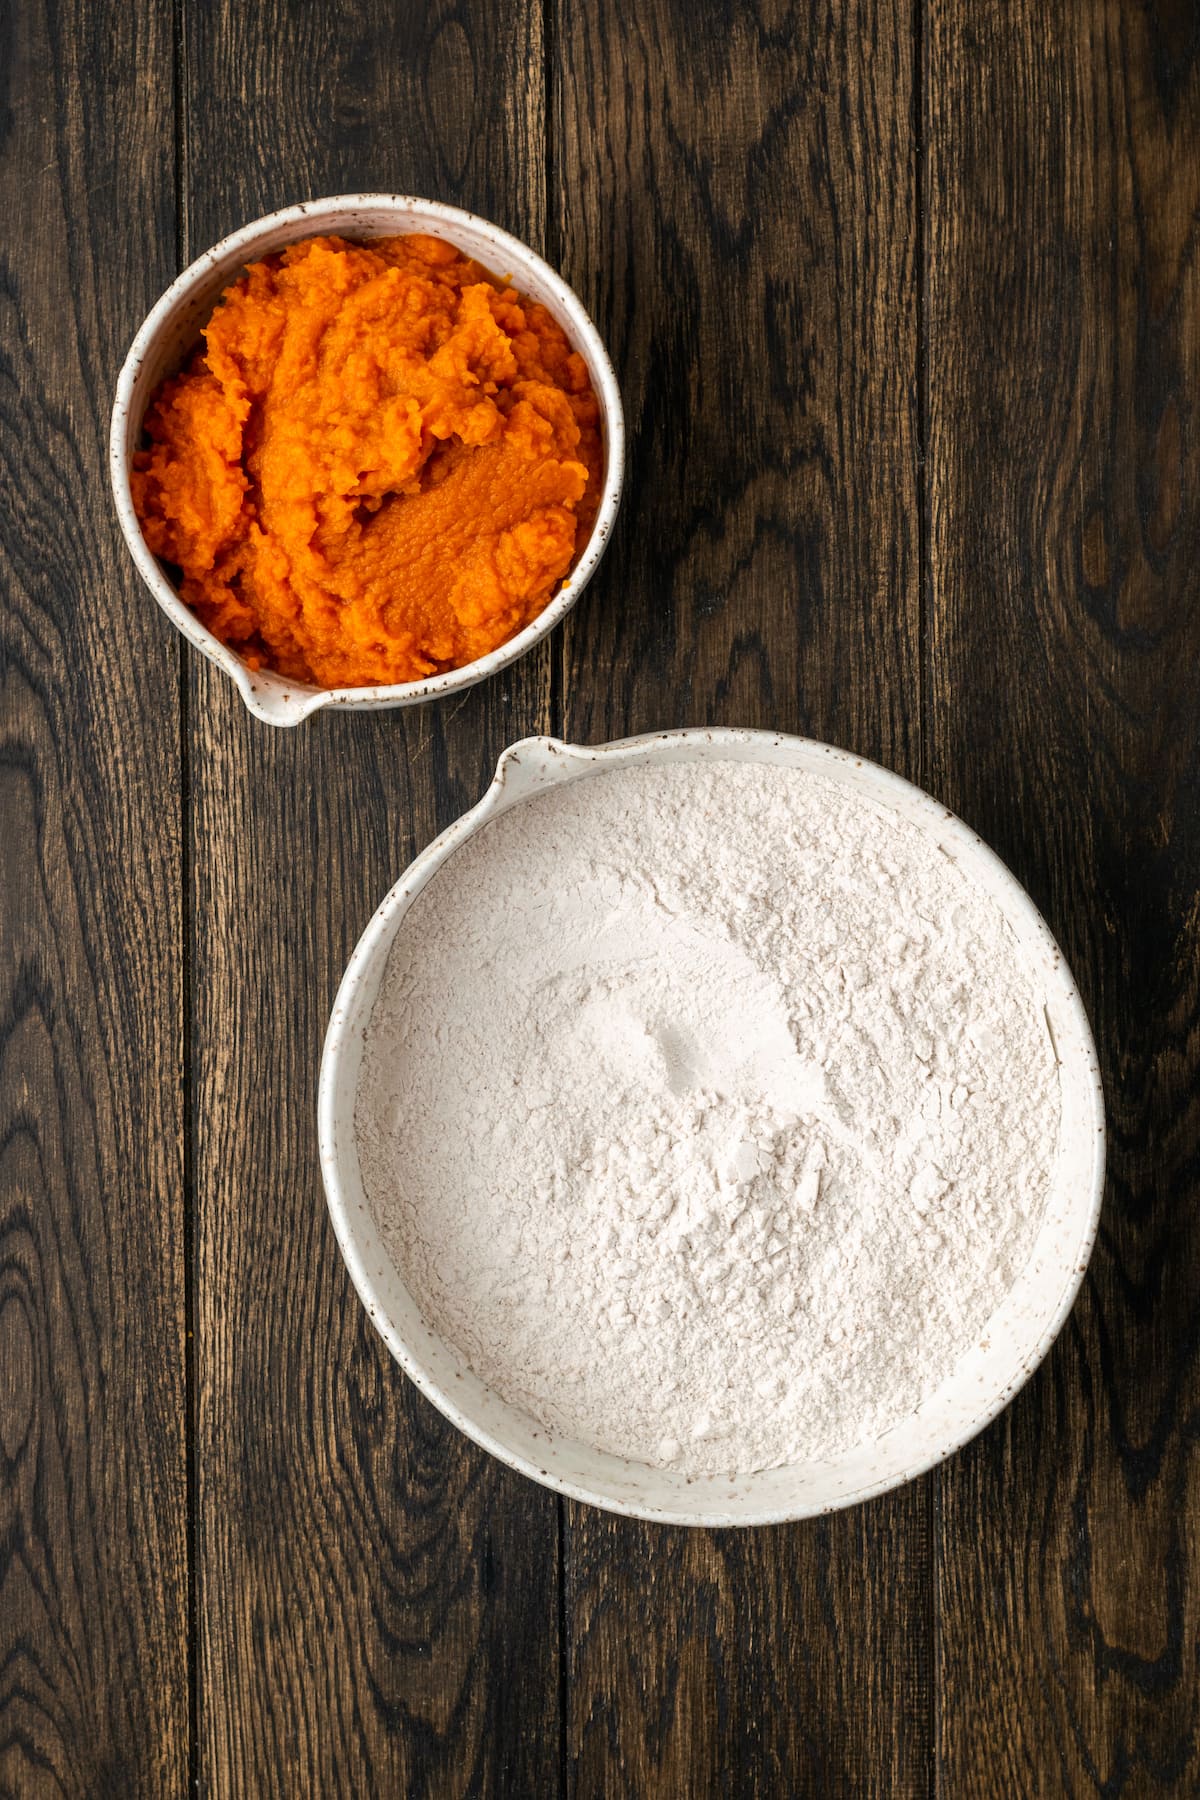 The two ingredients for pumpkin cookies with cake mix.